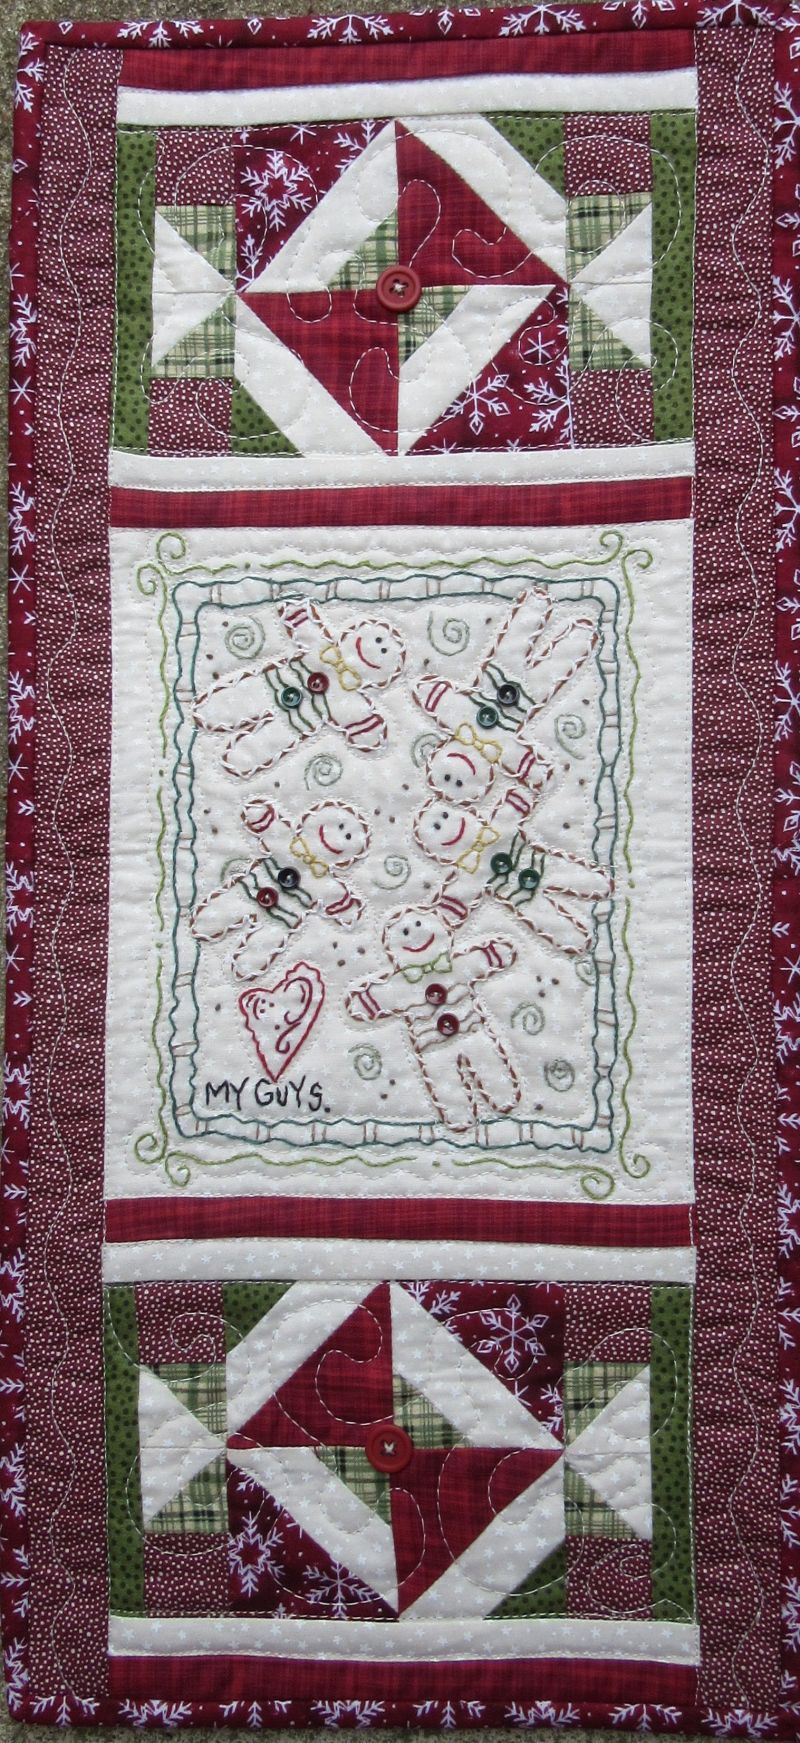 Embroidery Patterns For Quilts Mini Hand Embroidery Patterns To Use To Make Your Own Table Runners